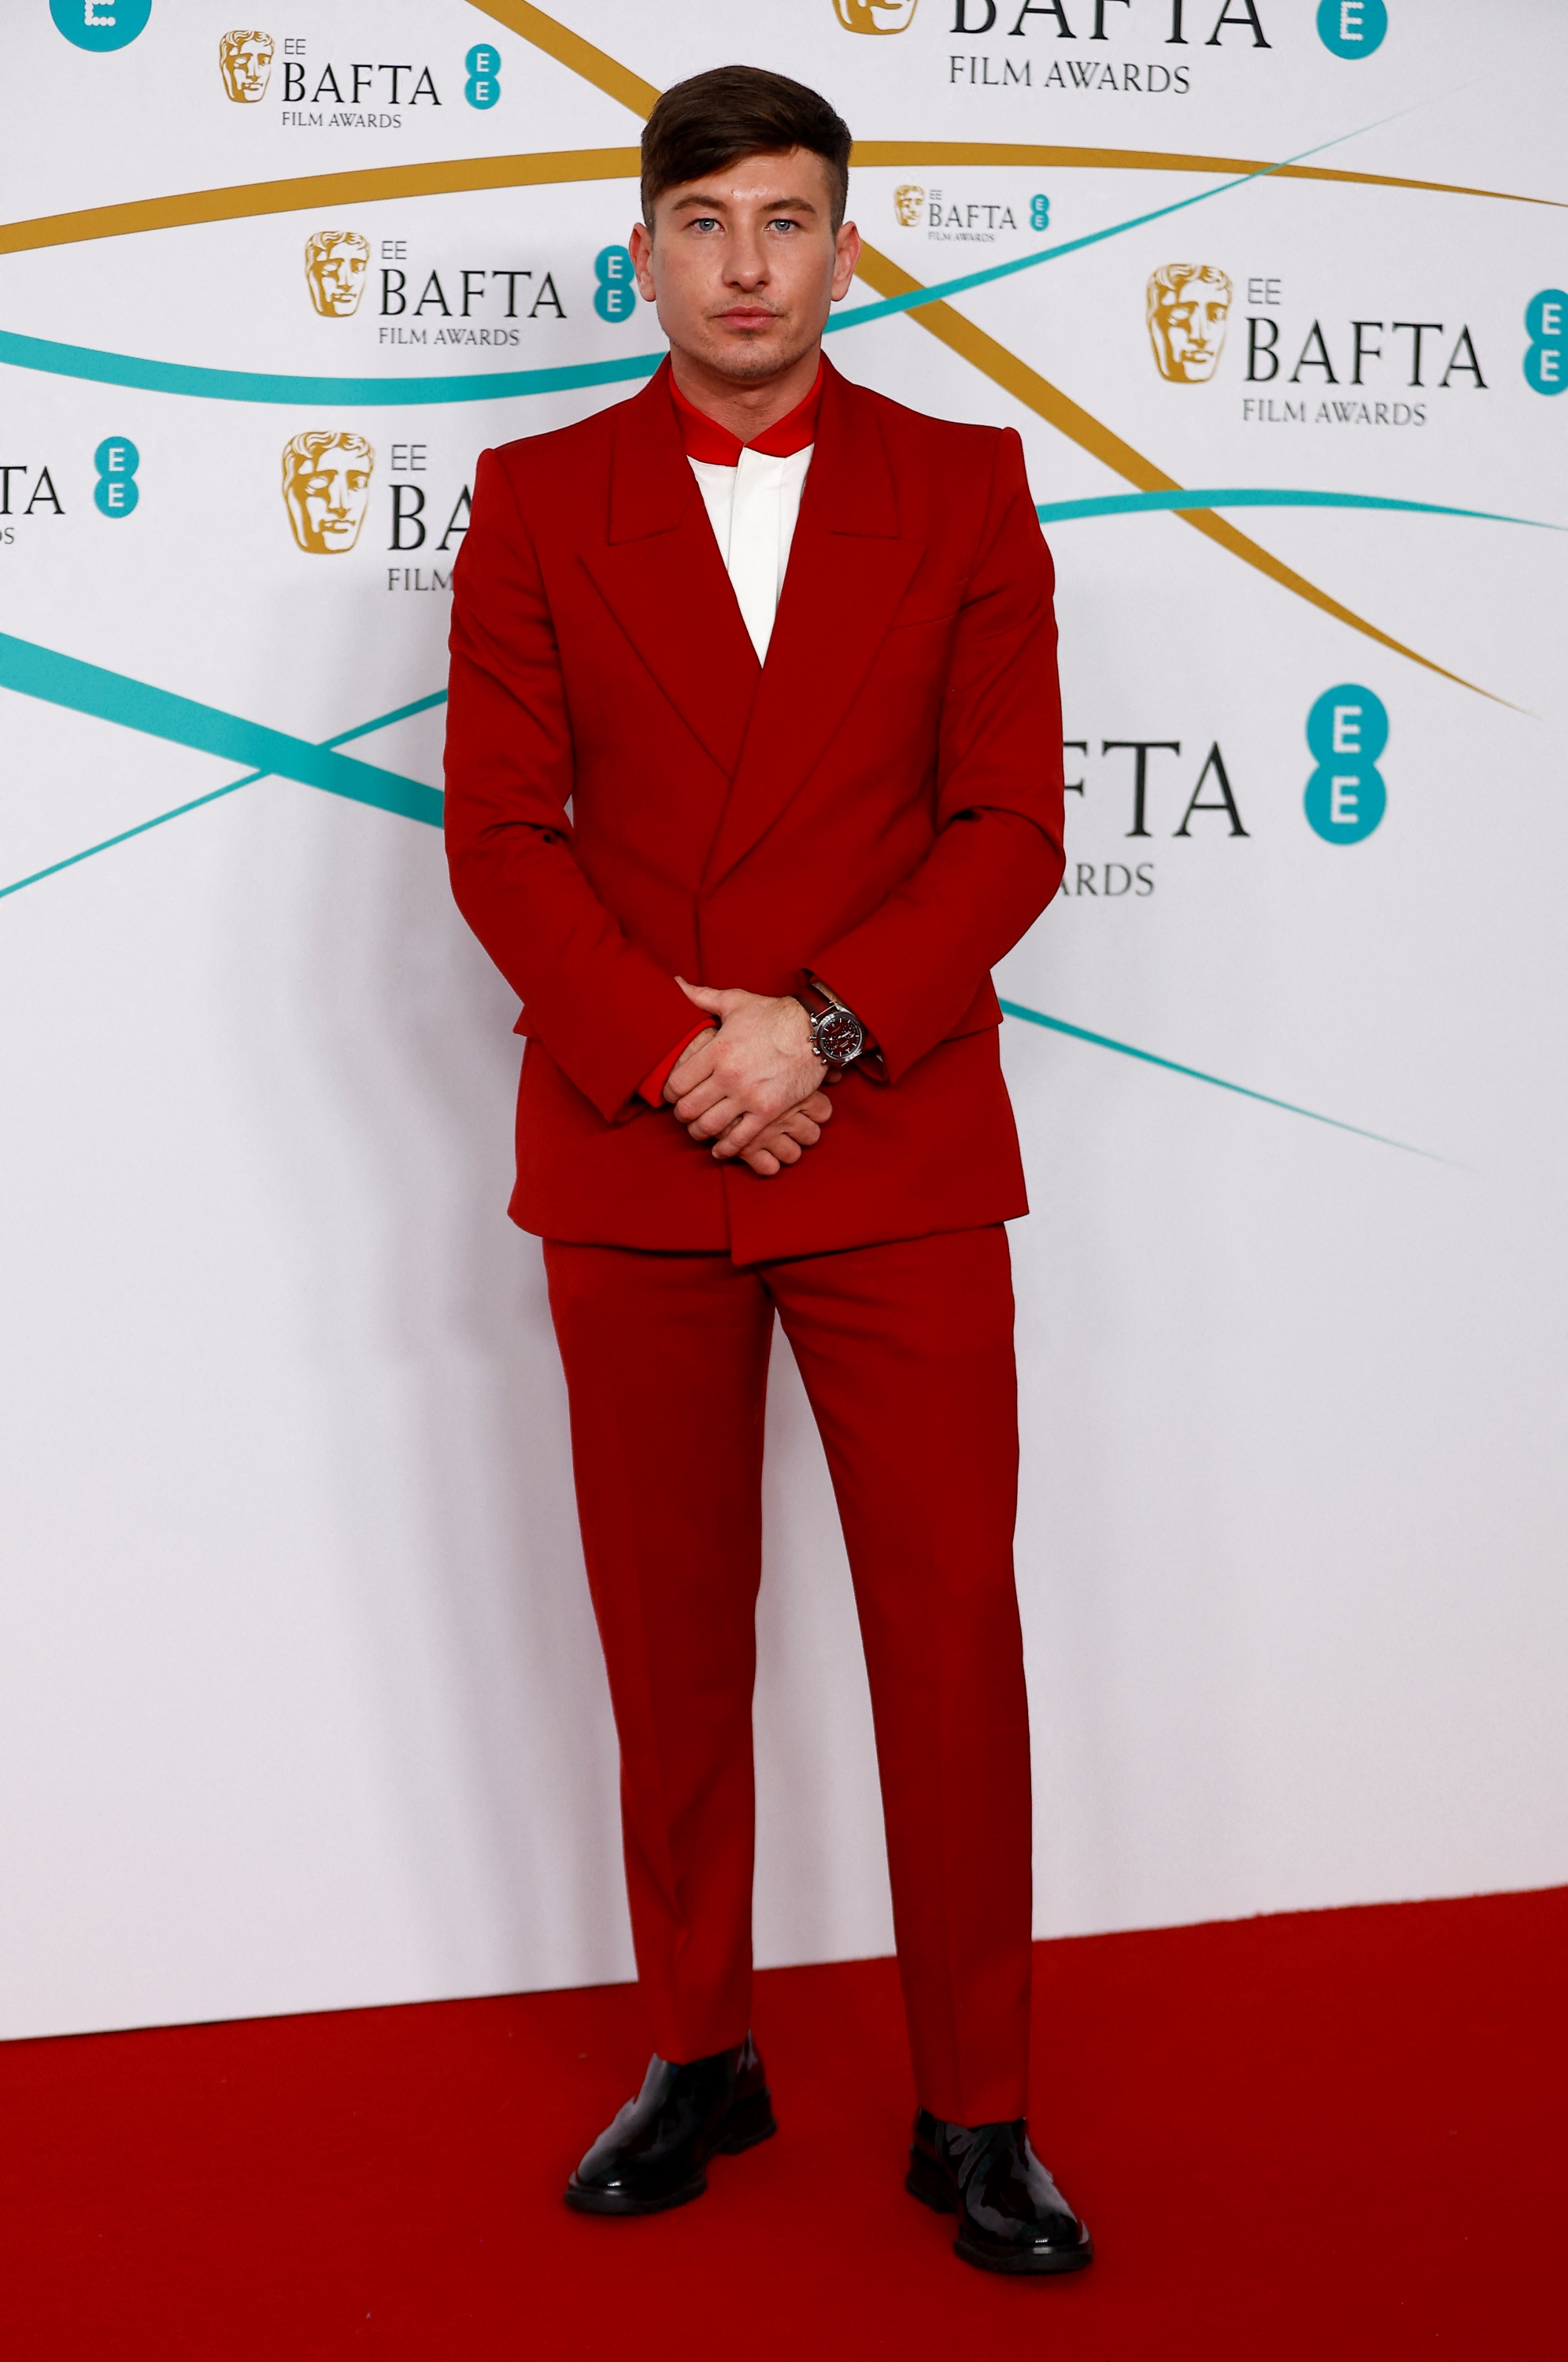 Barry Keoghan wearing an all-red slim-fit suit with a white button-up shirt with a red collar underneath.